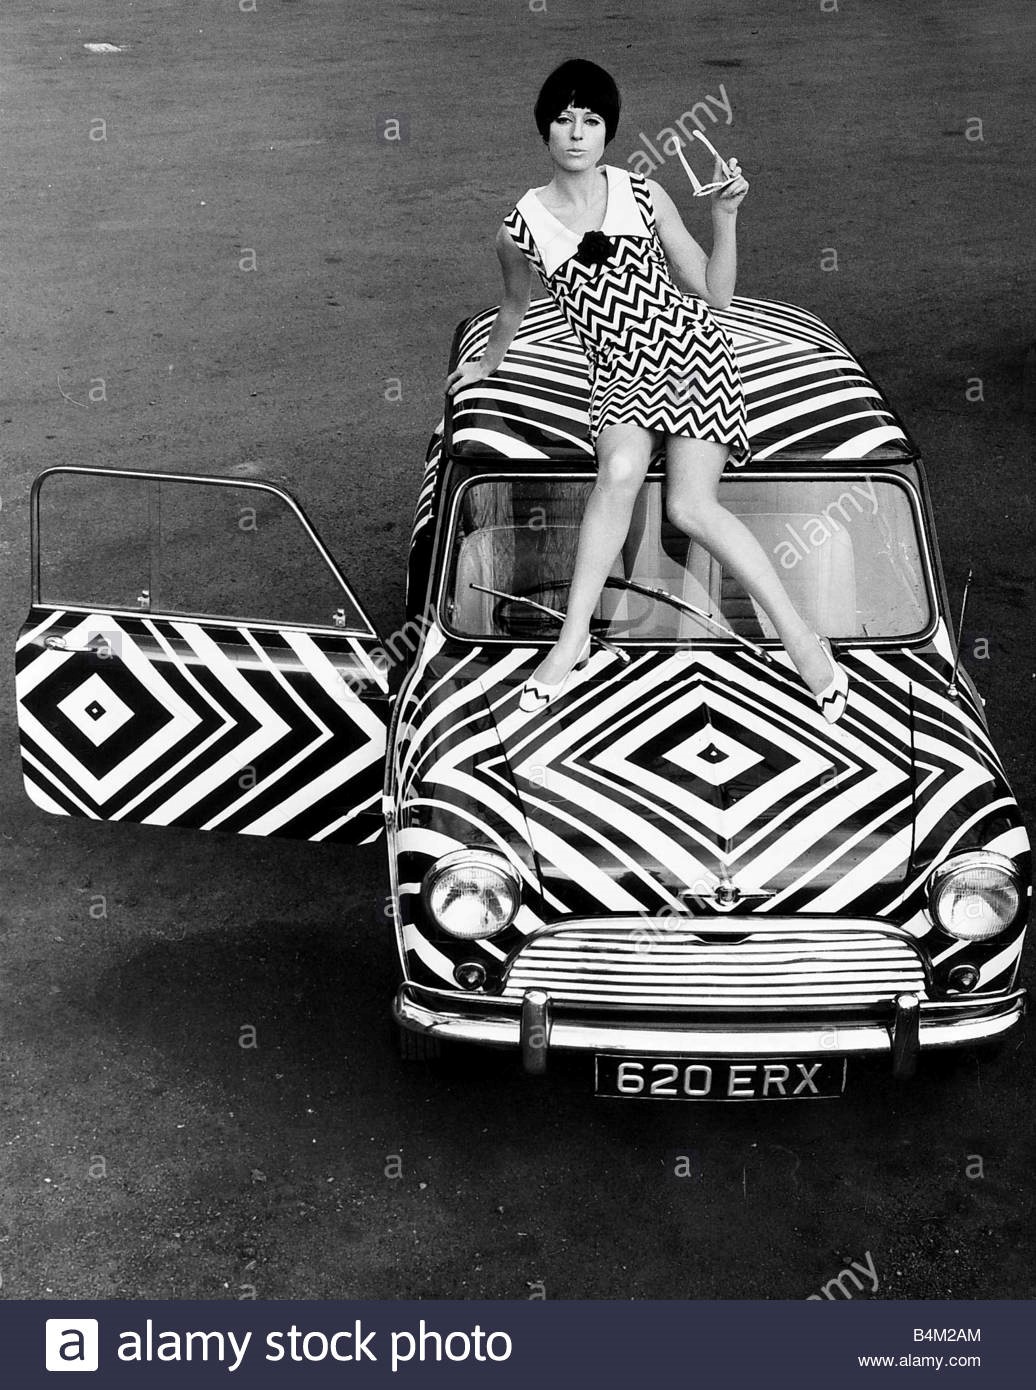 A girl on the Mini that has received the op art treatment in March 1966..